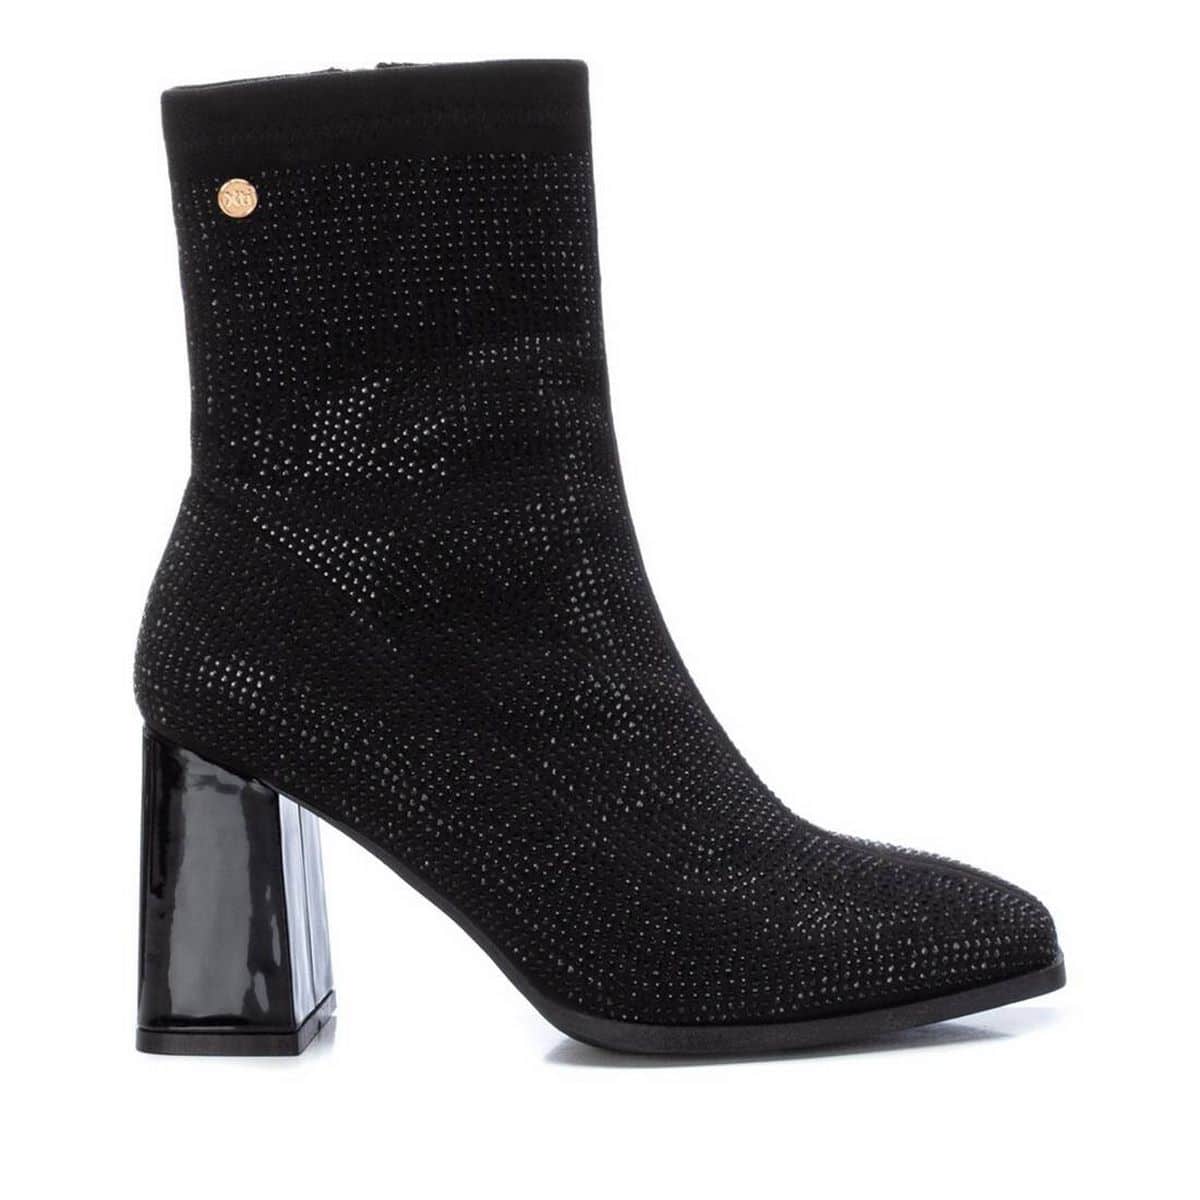 VEGAN SUEDE HEELED BOOTS WITH STRASS 142047 XTI BLACK